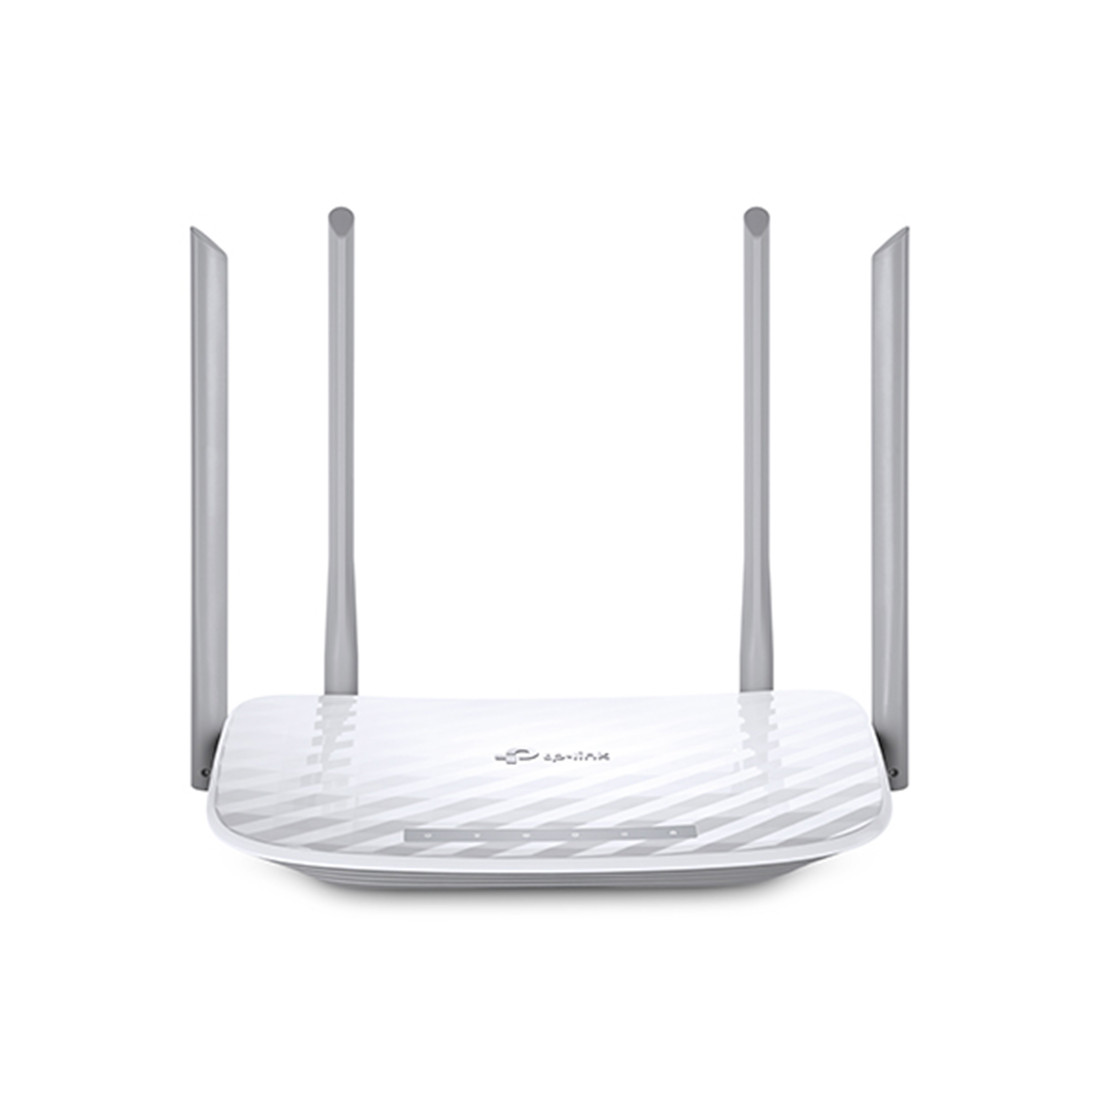 Маршрутизатор  TP-Link  Archer C50  1200М